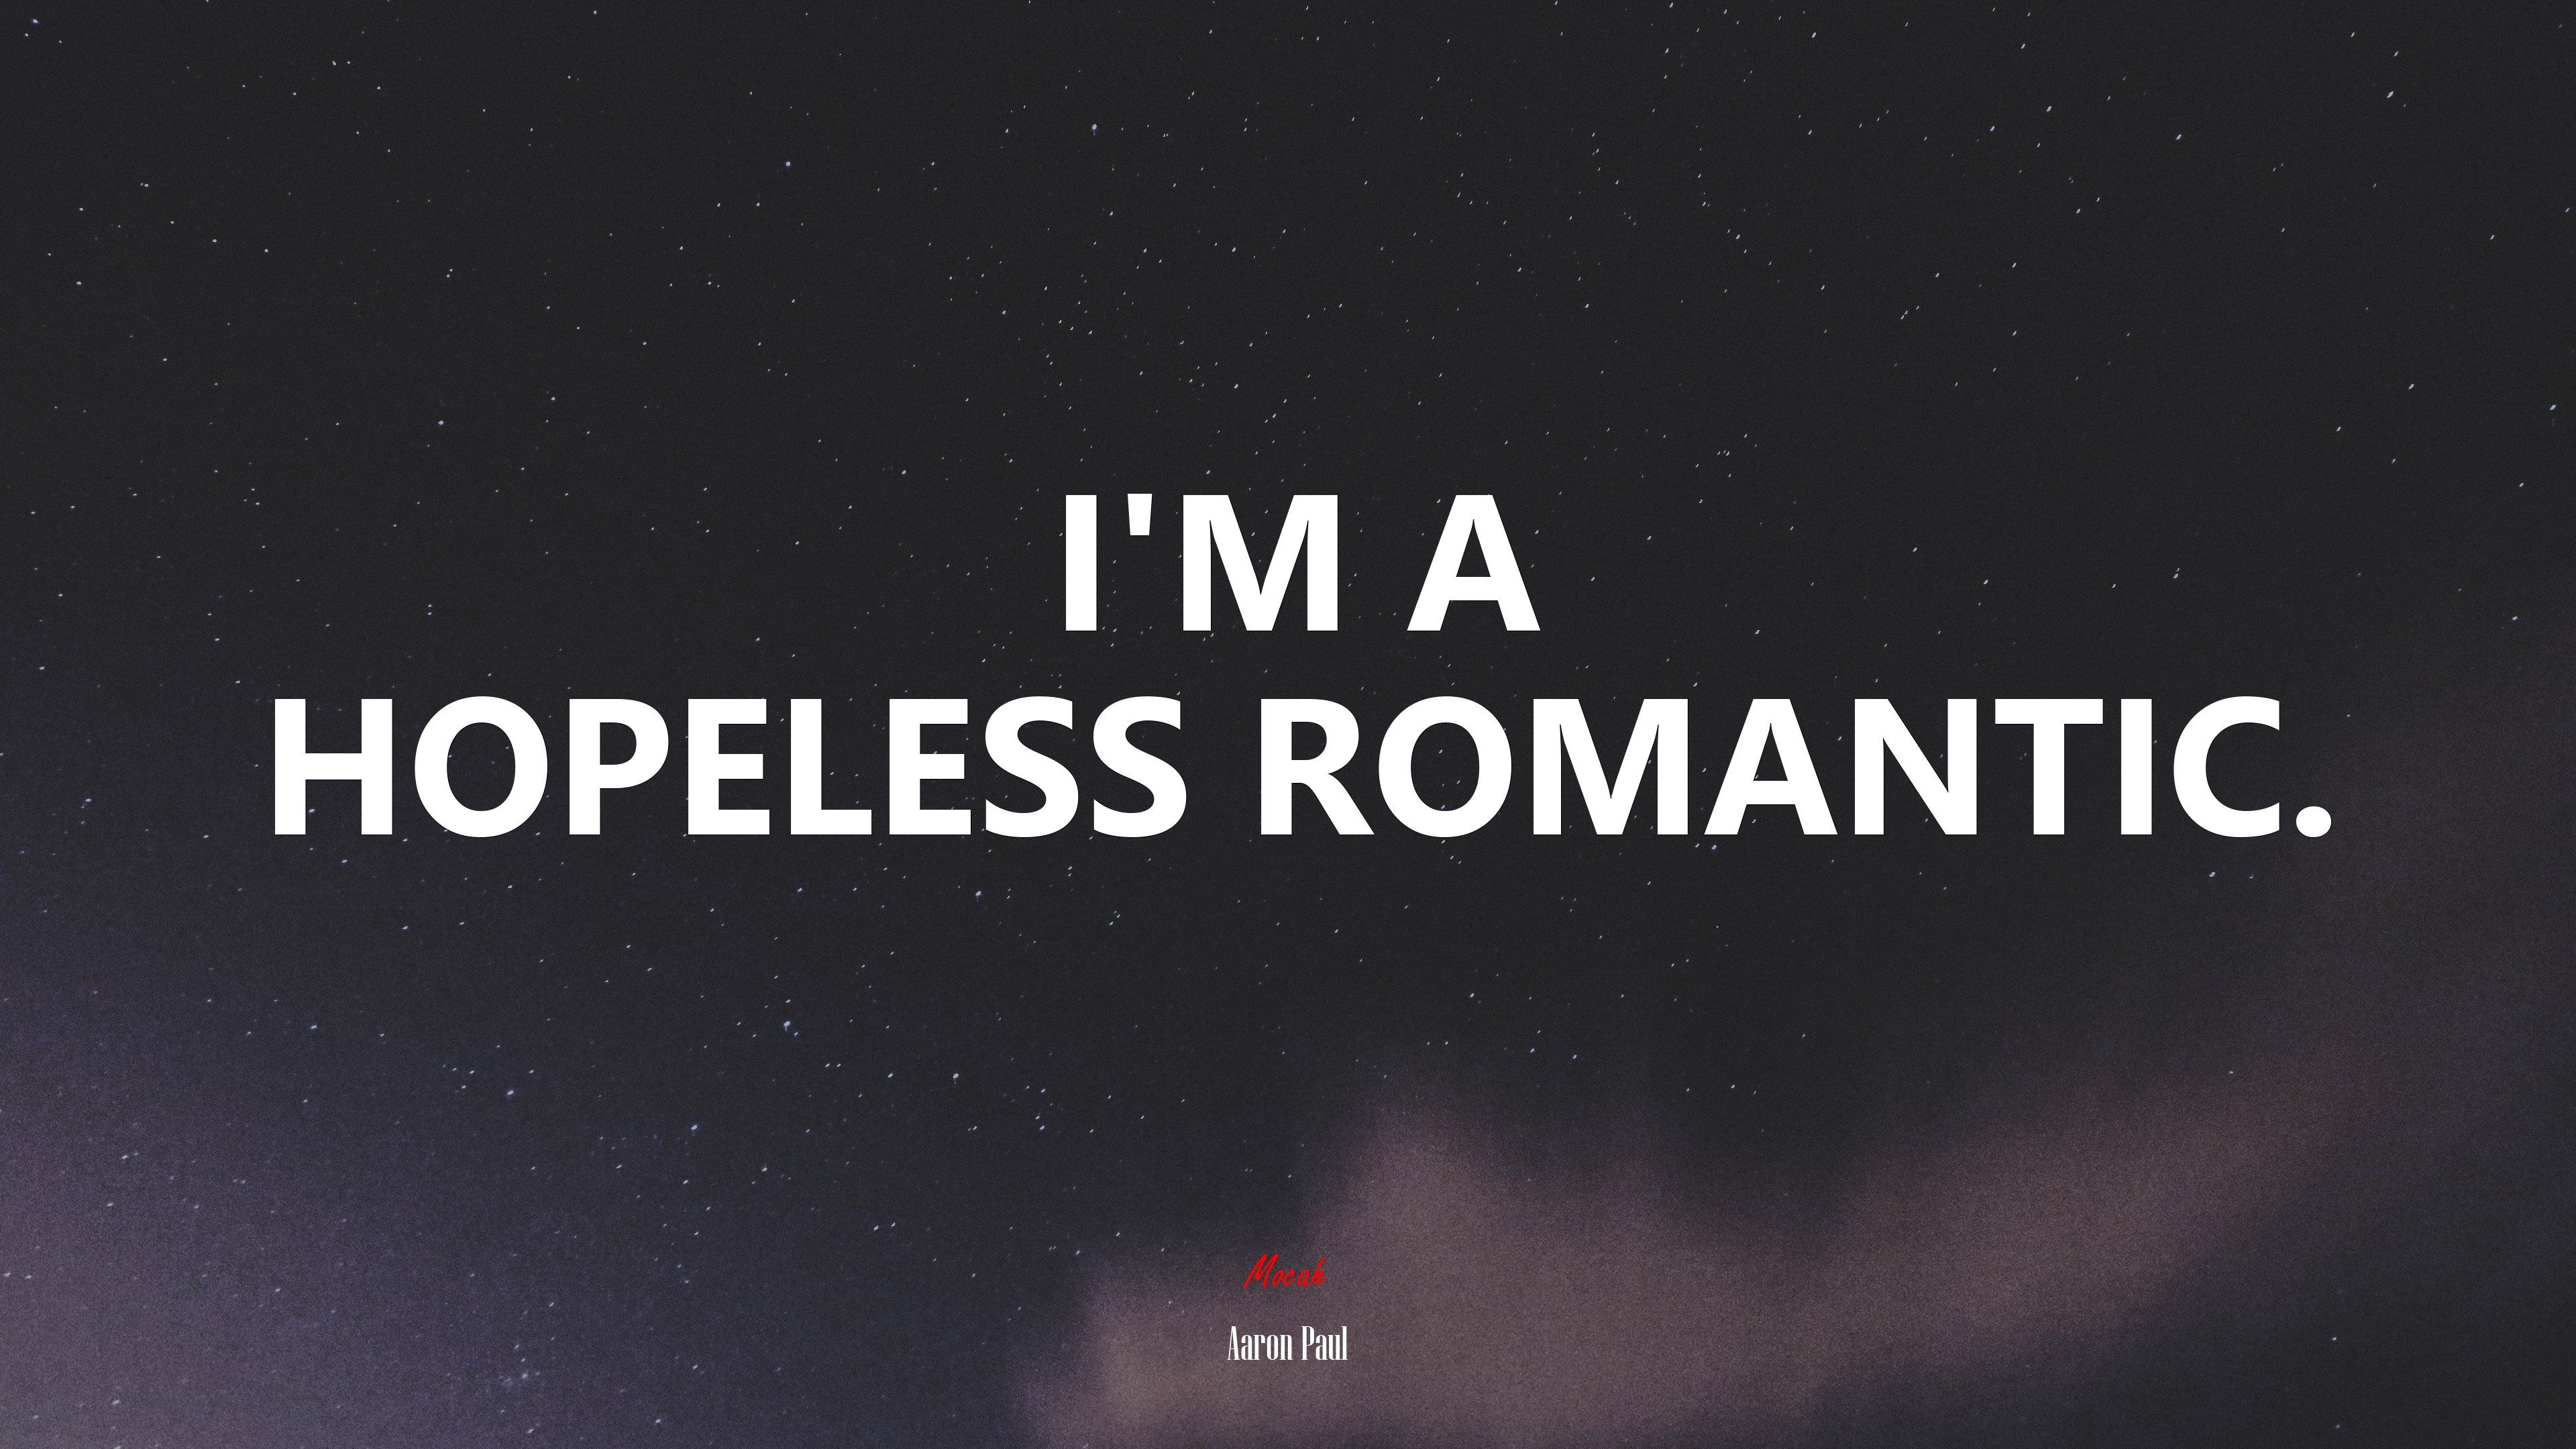 I'm always going to be a hopeless romantic. Always. Taylor Swift quote, 4k wallpaper